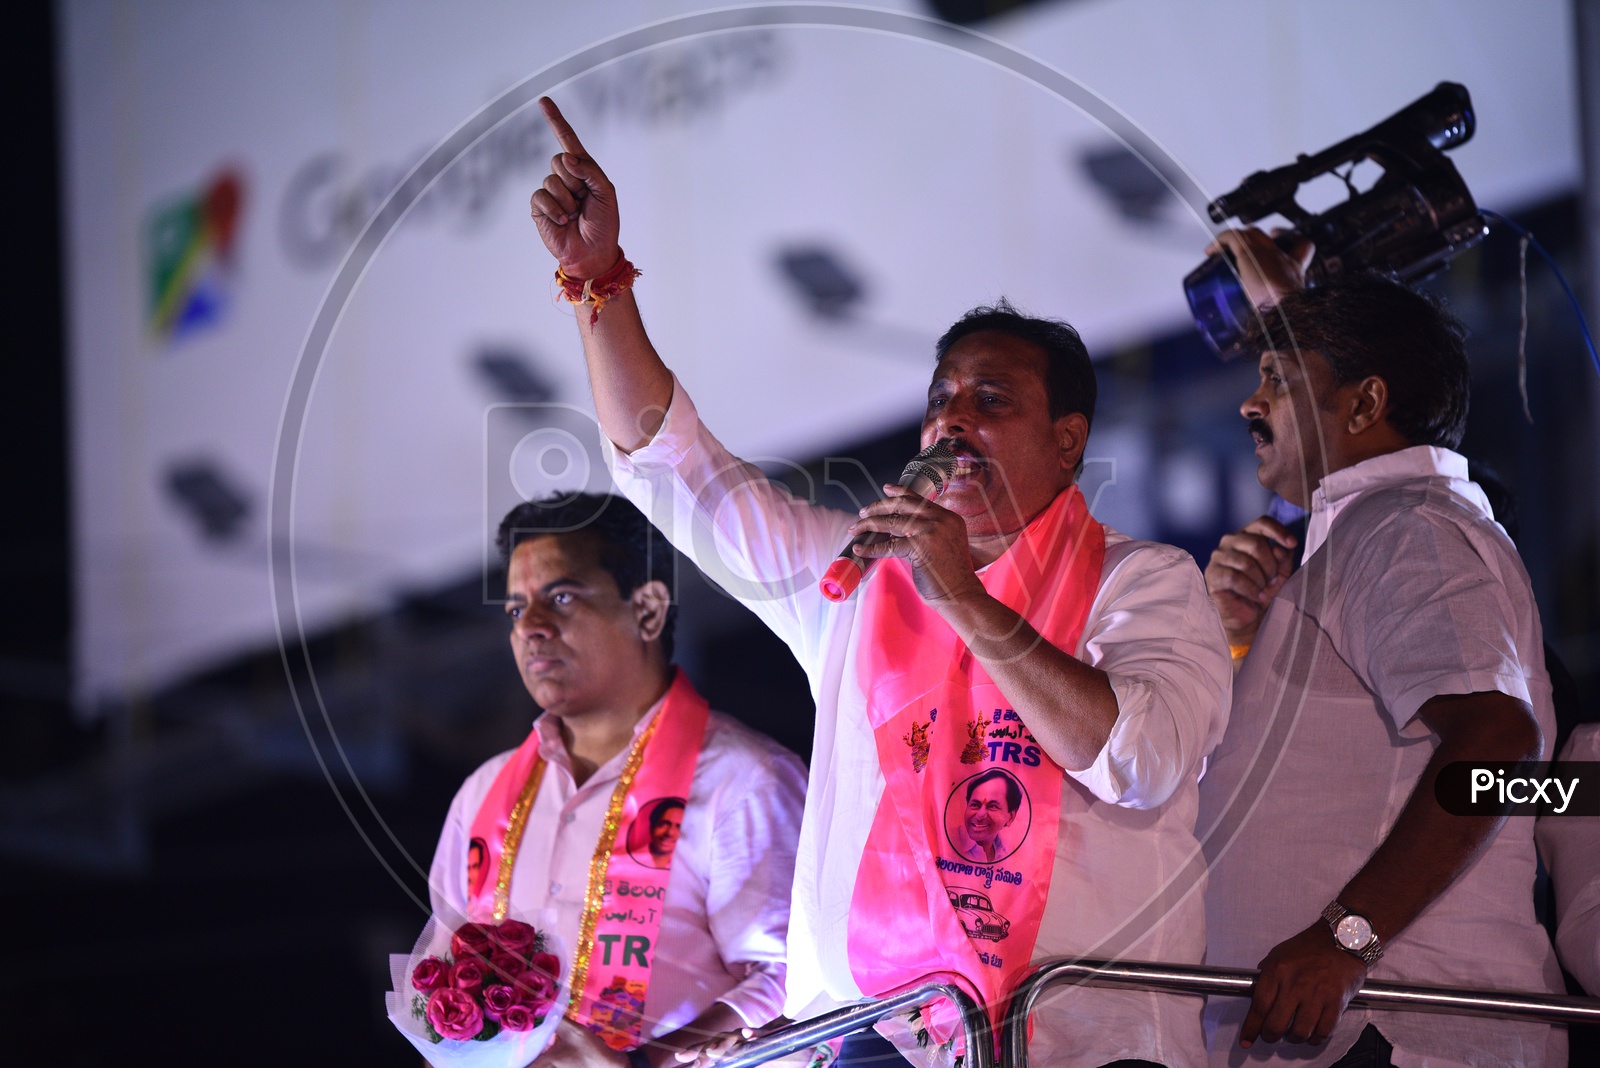 KTR and Danam Nagender at a Party Election Rally During Election Campaign 2018